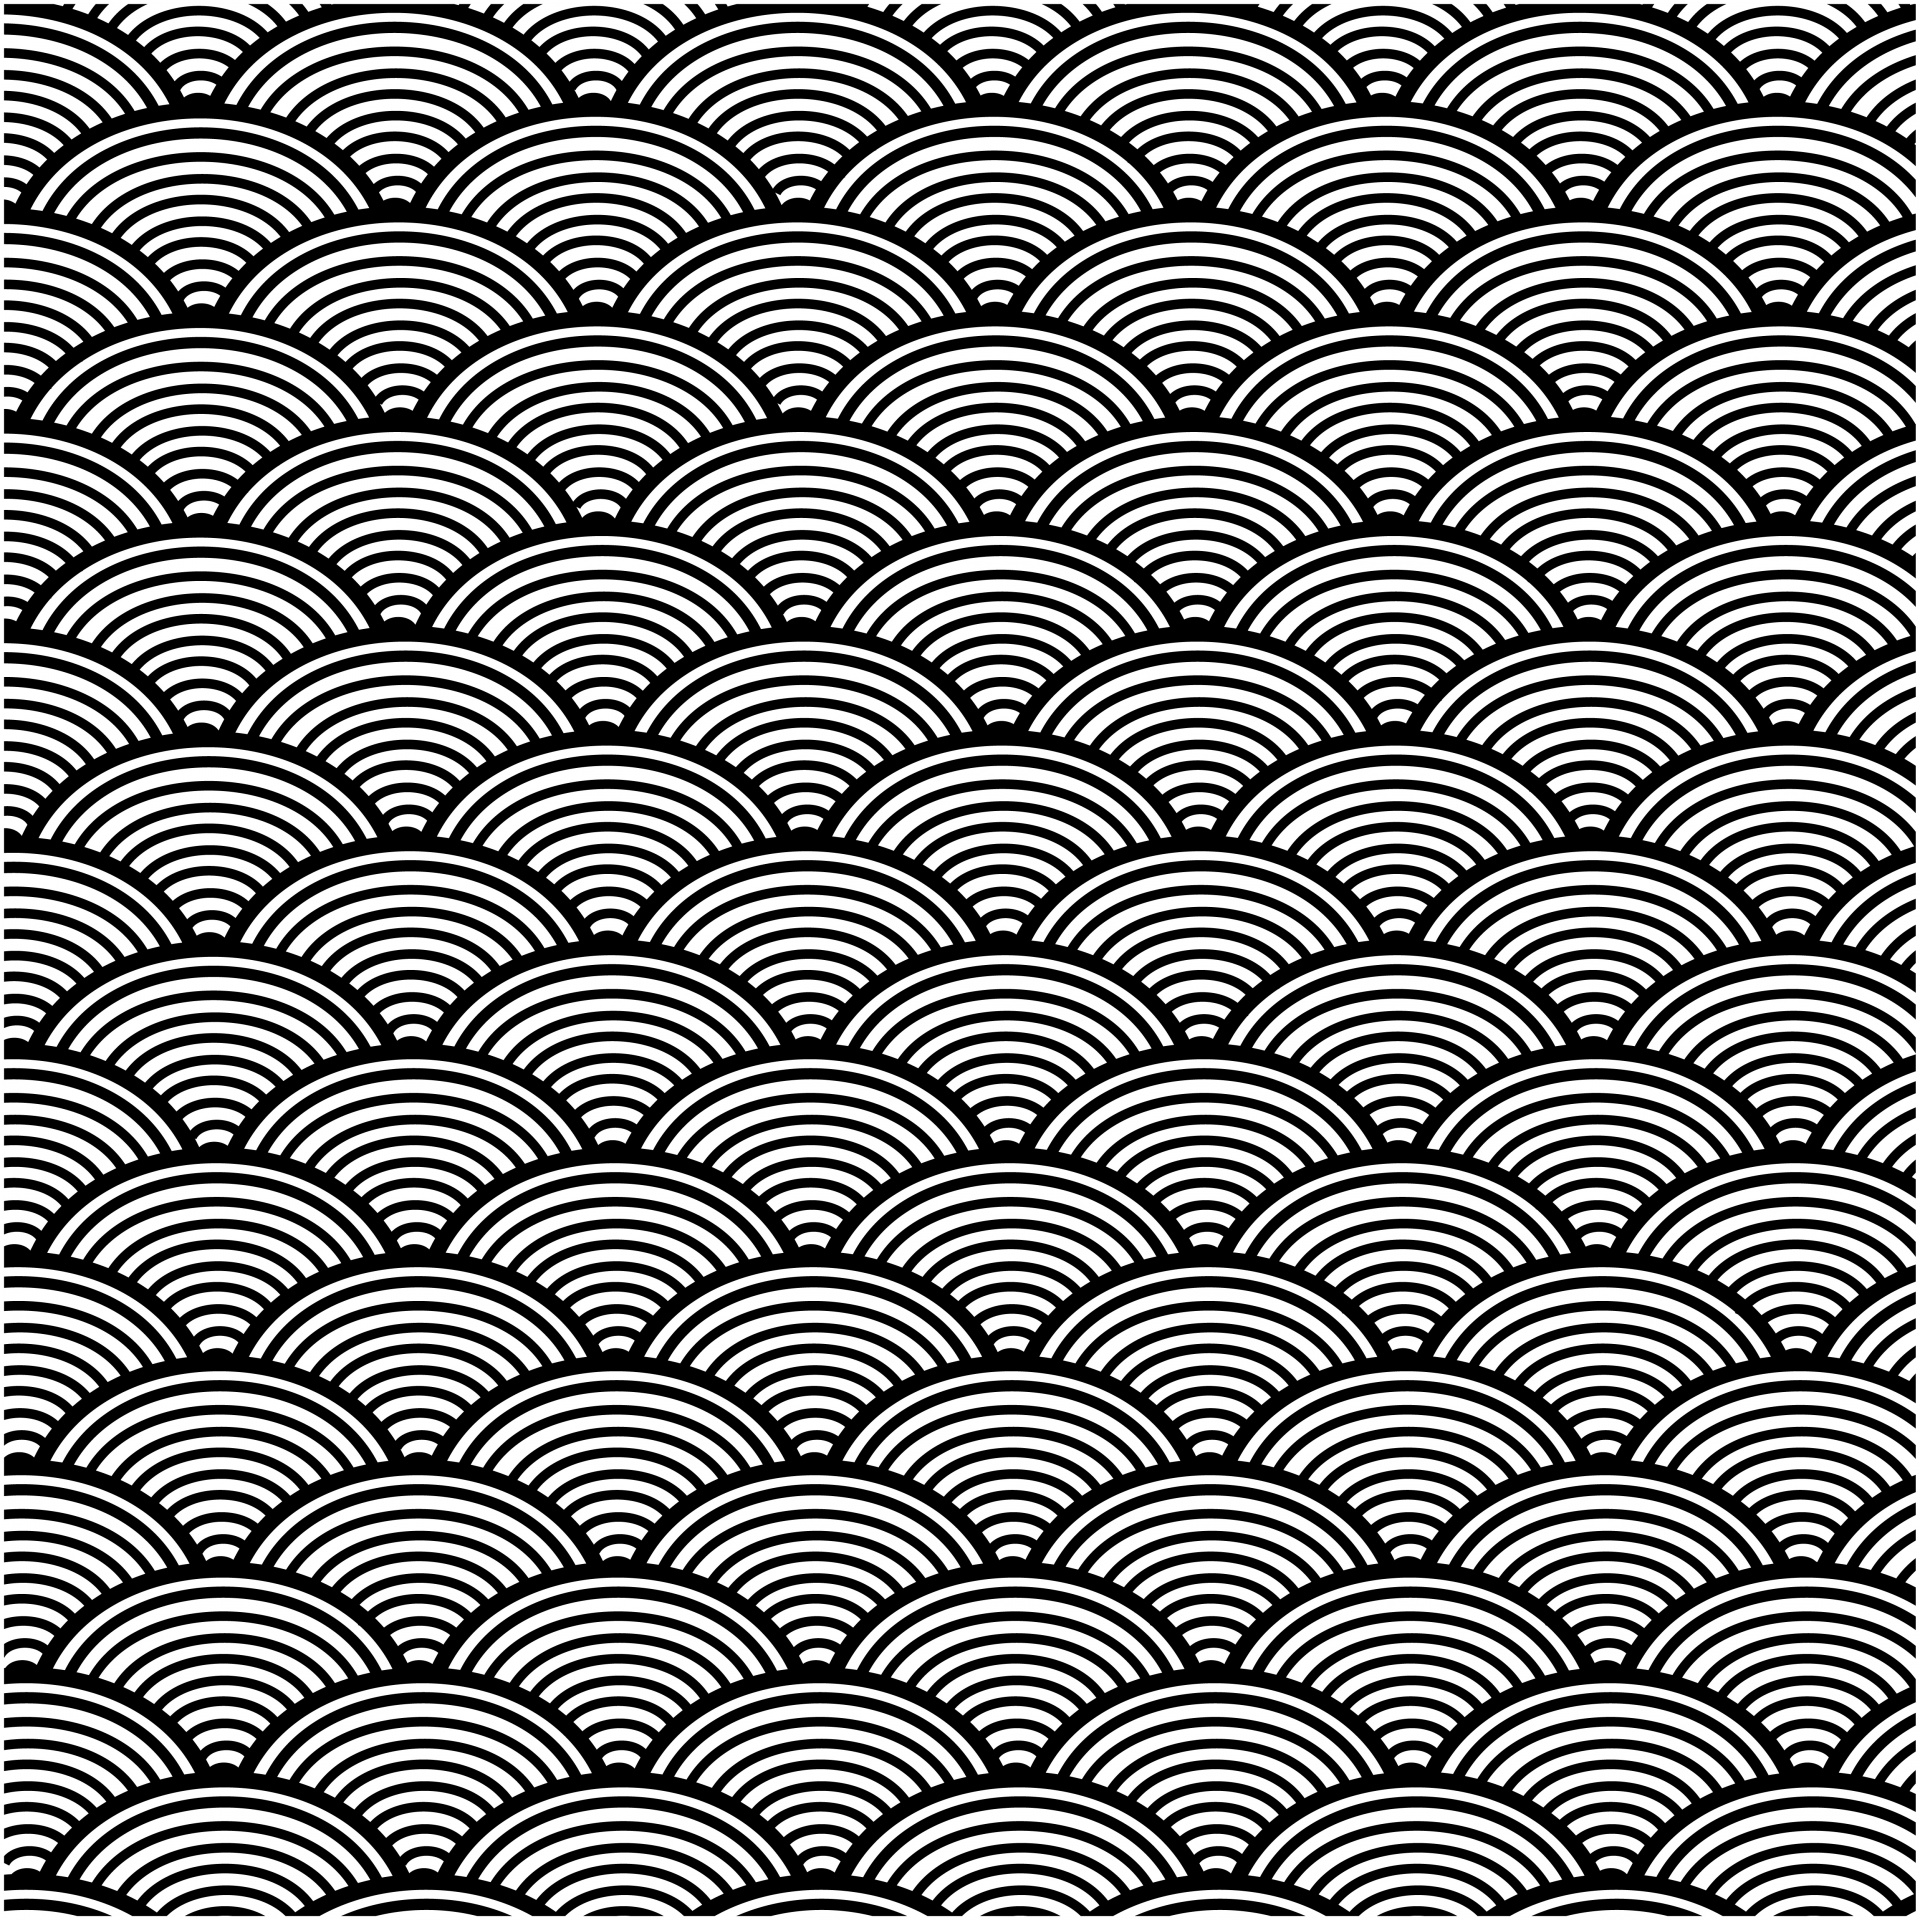 Black and white japanese wave pattern wallpaper background